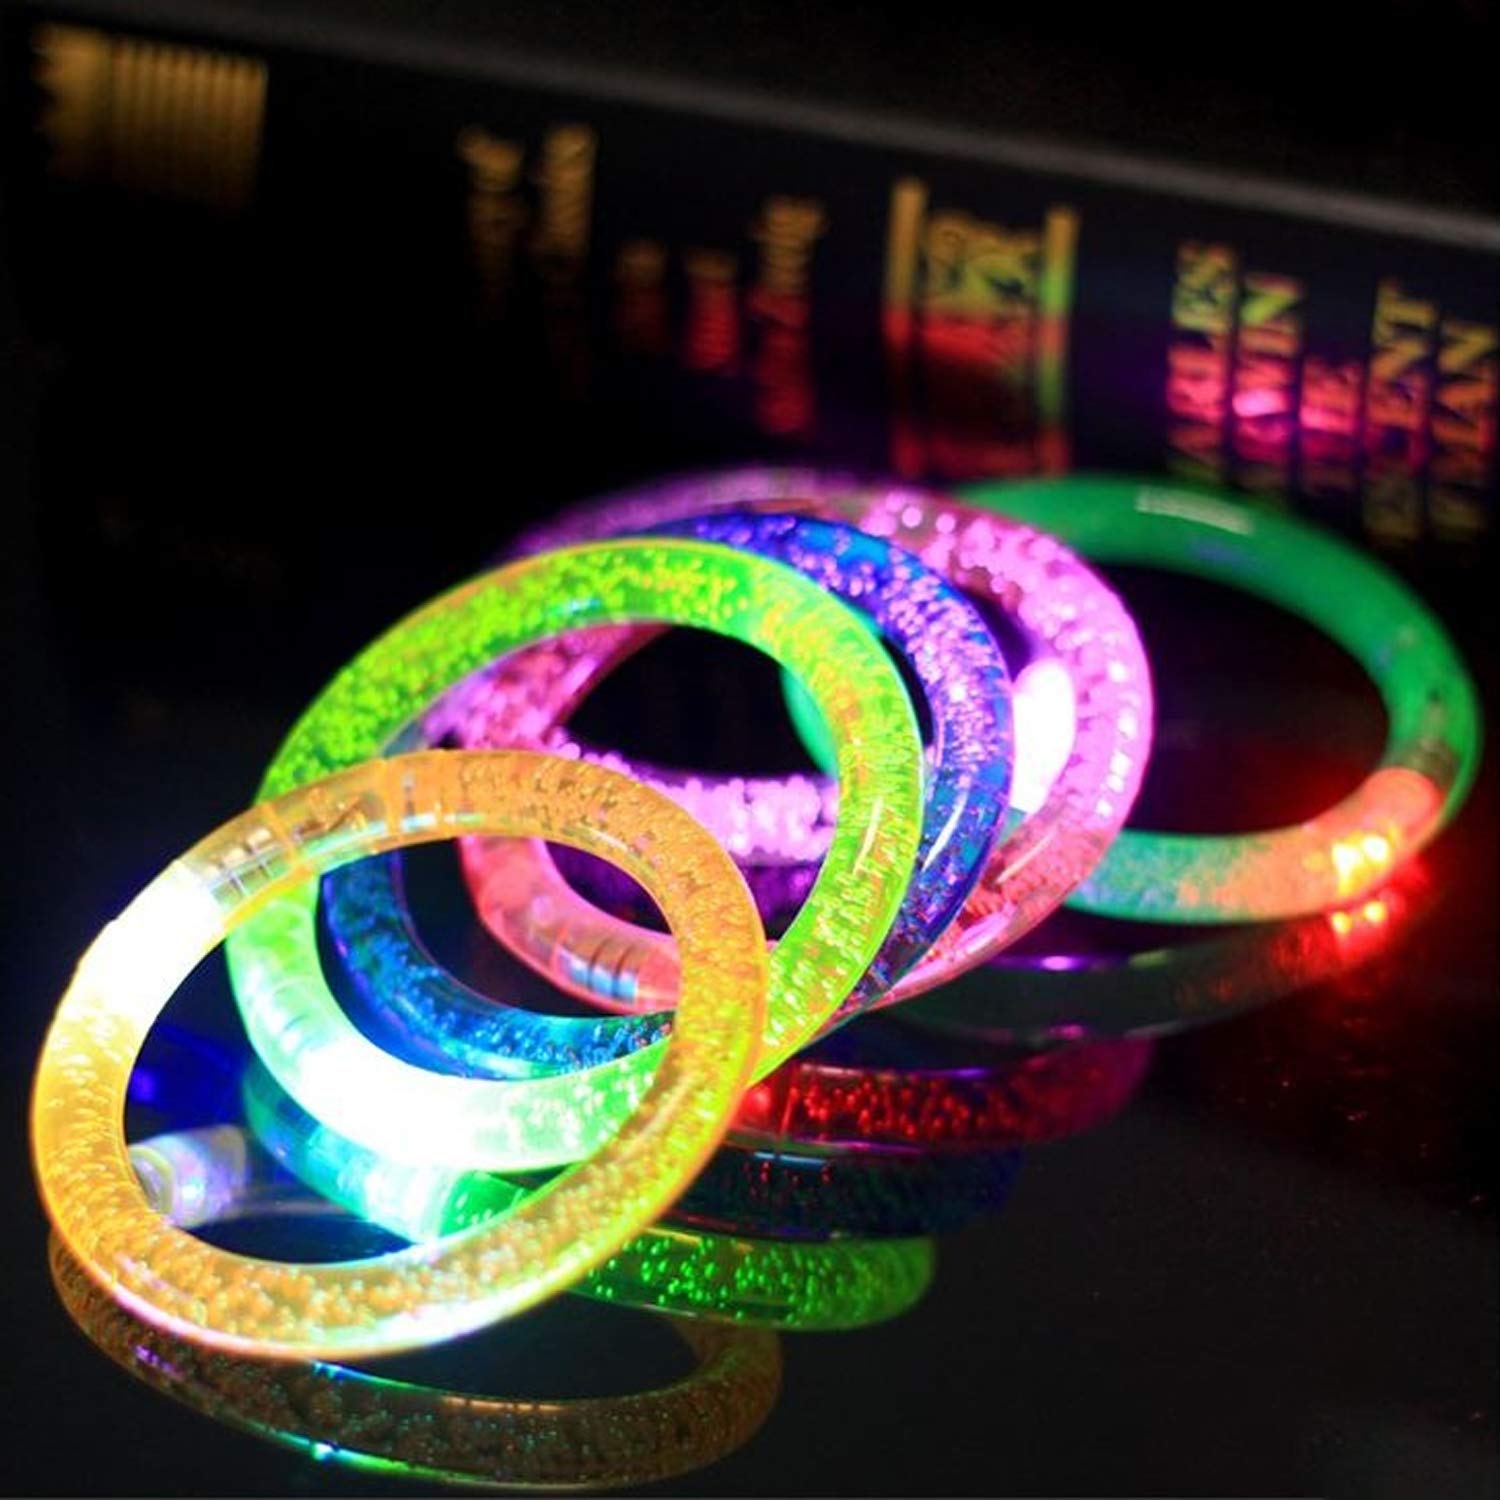 24 Pack Patriotic Glow In The Dark LED Bracelets Memorial Day Party Favors for Kids Adult Party Supplies Flashing Light Up Bracelet Glow Sticks Party Toys 4th of July Accessories Birthday Games Gifts